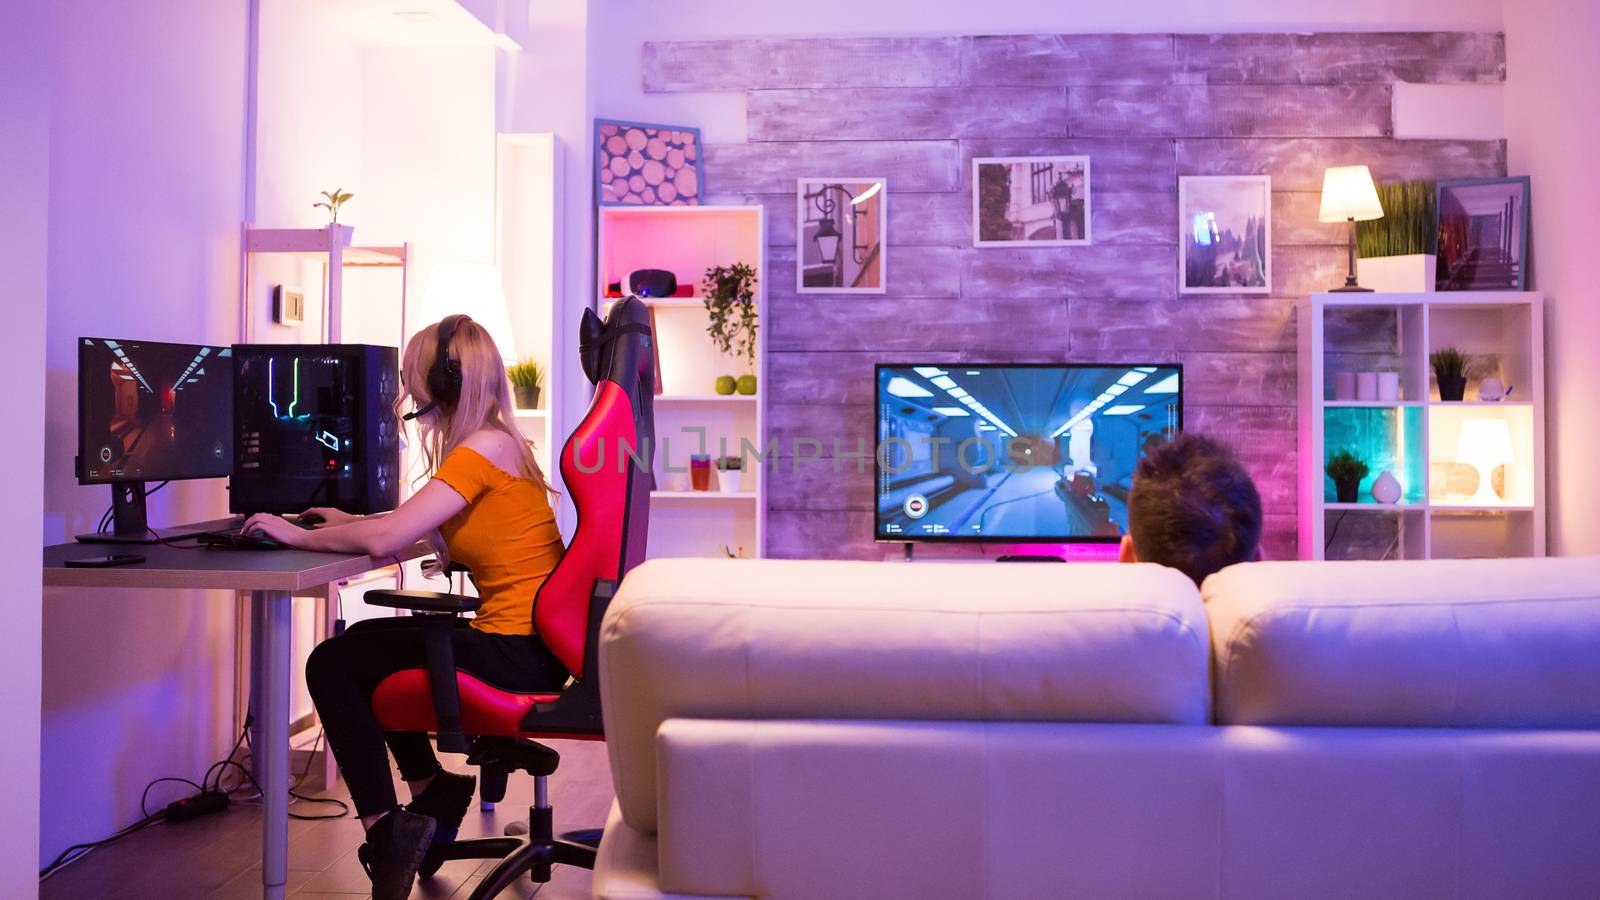 Girl with headphones sitting on gaming chair and playing shooter games. Male sitting on sofa.